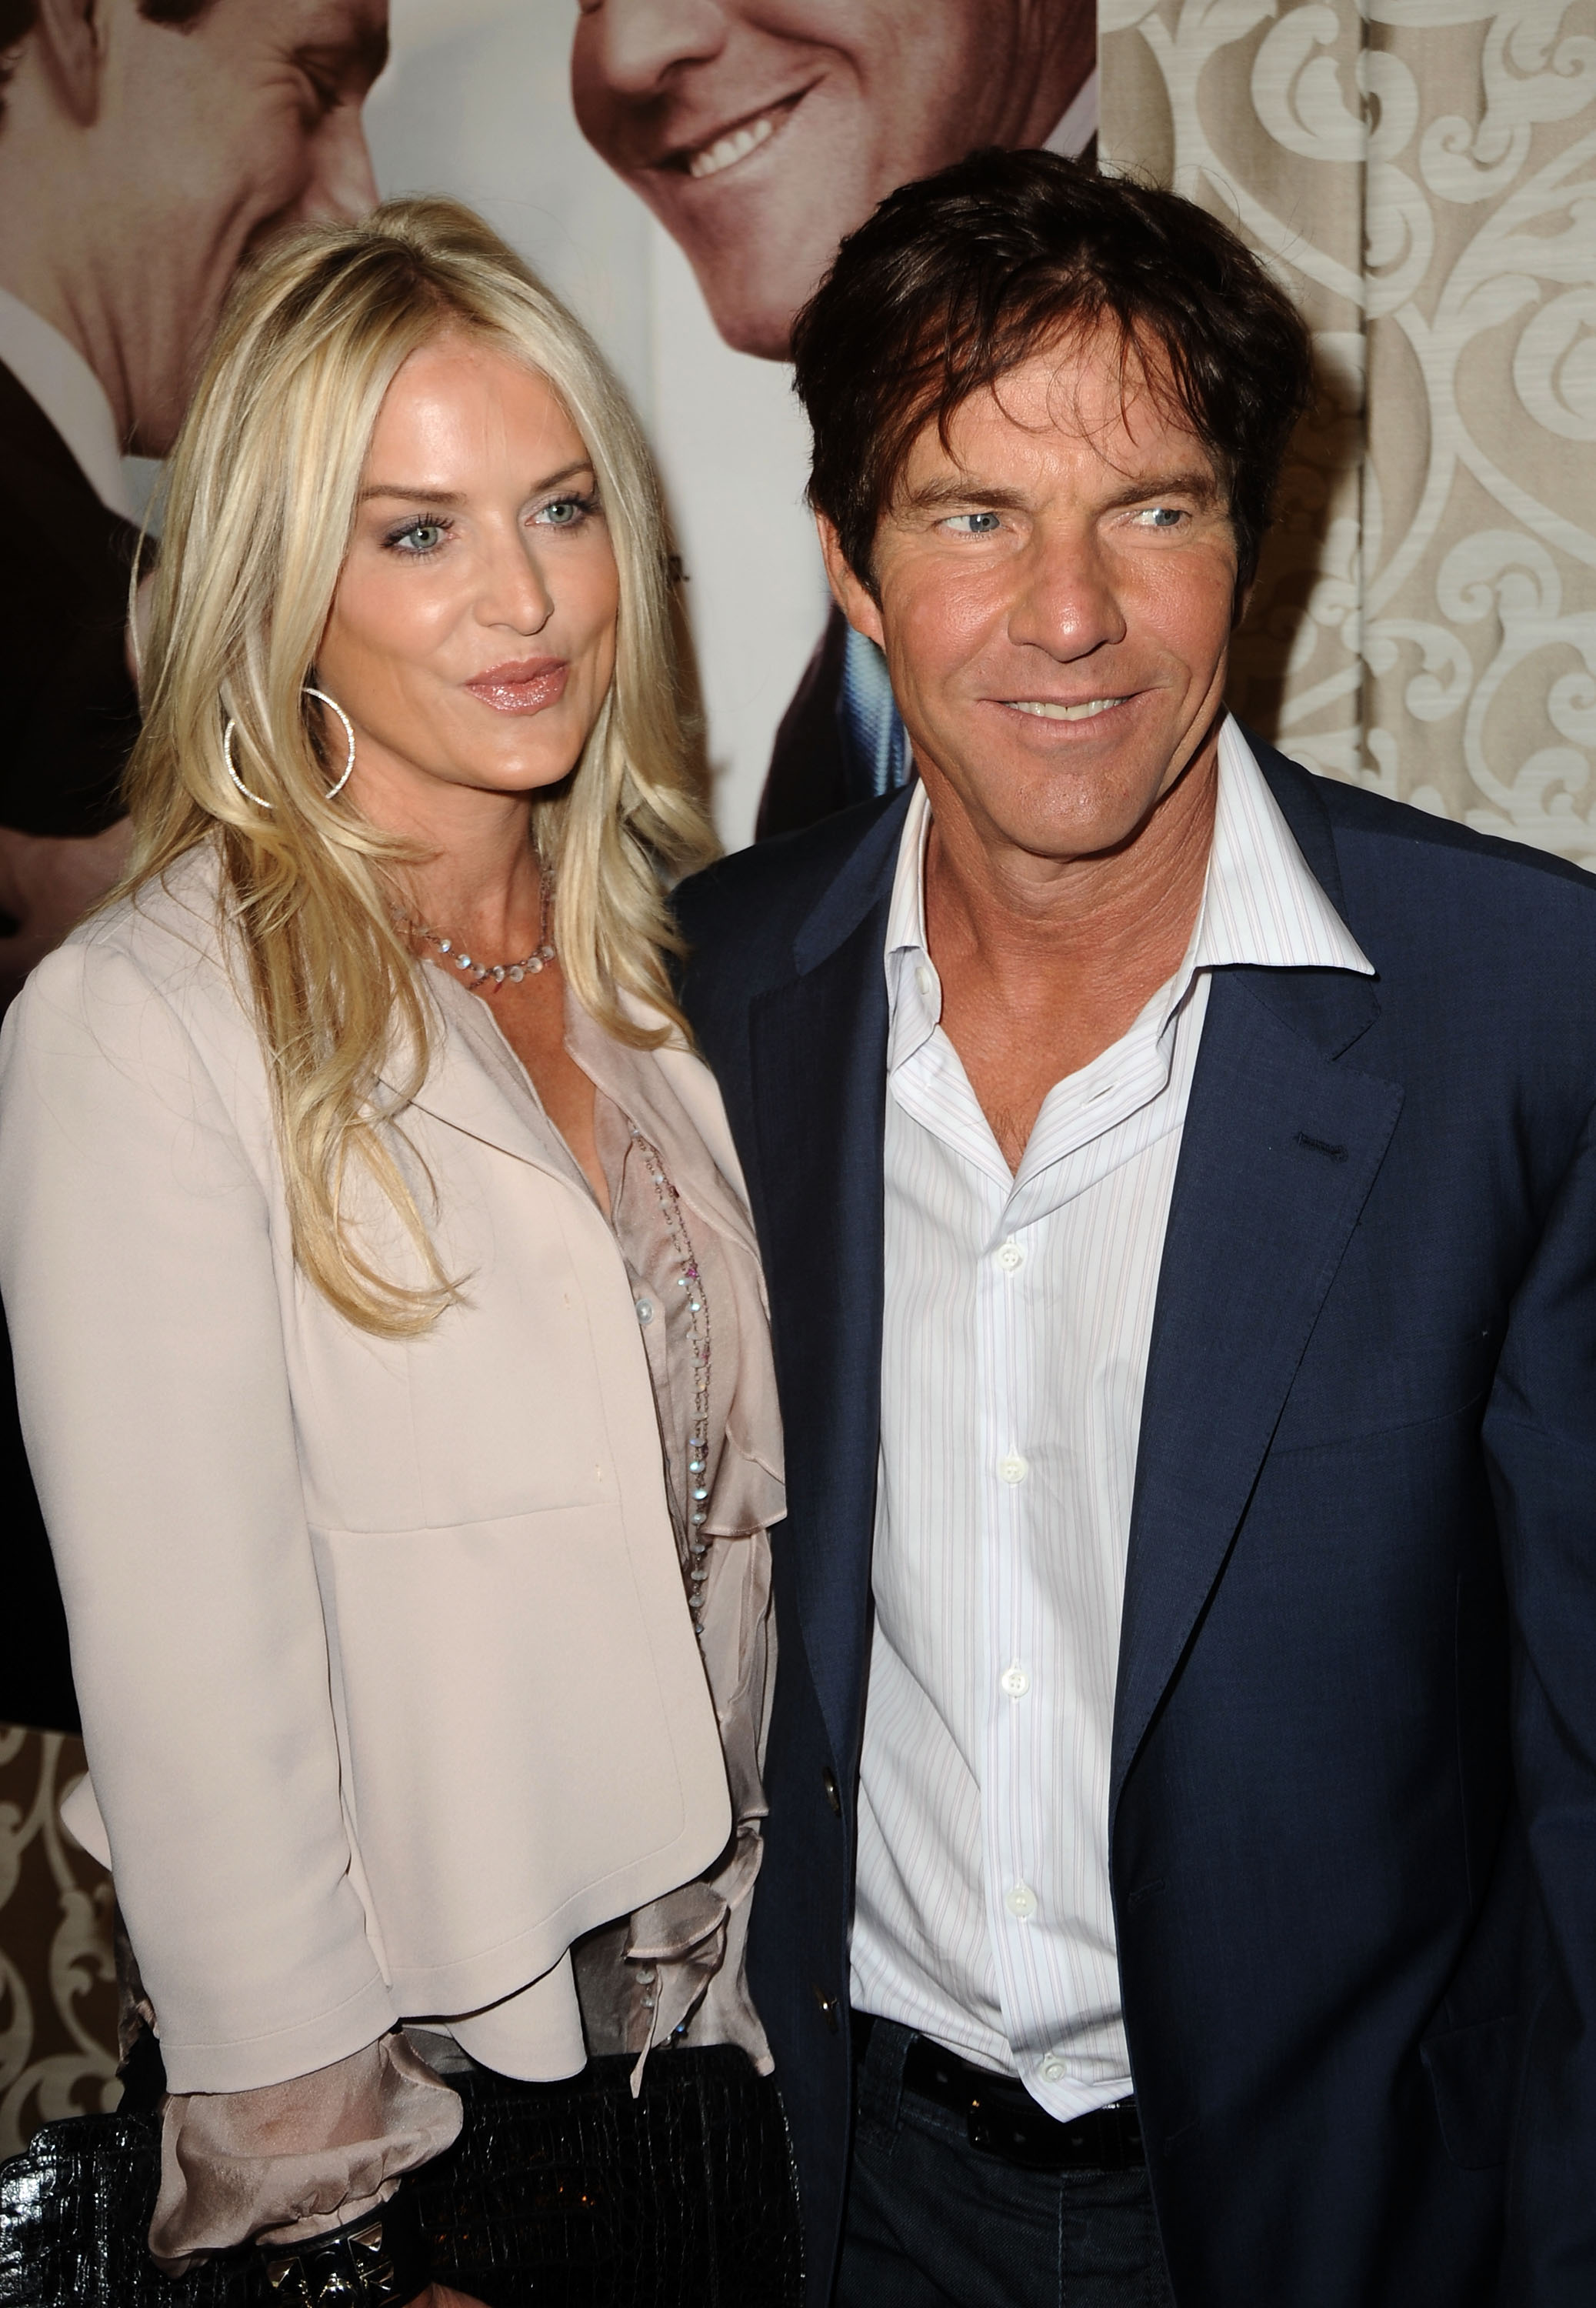 Dennis Quaid and Kimberly Buffington on May 19, 2010 in Los Angeles, California | Source: Getty Images